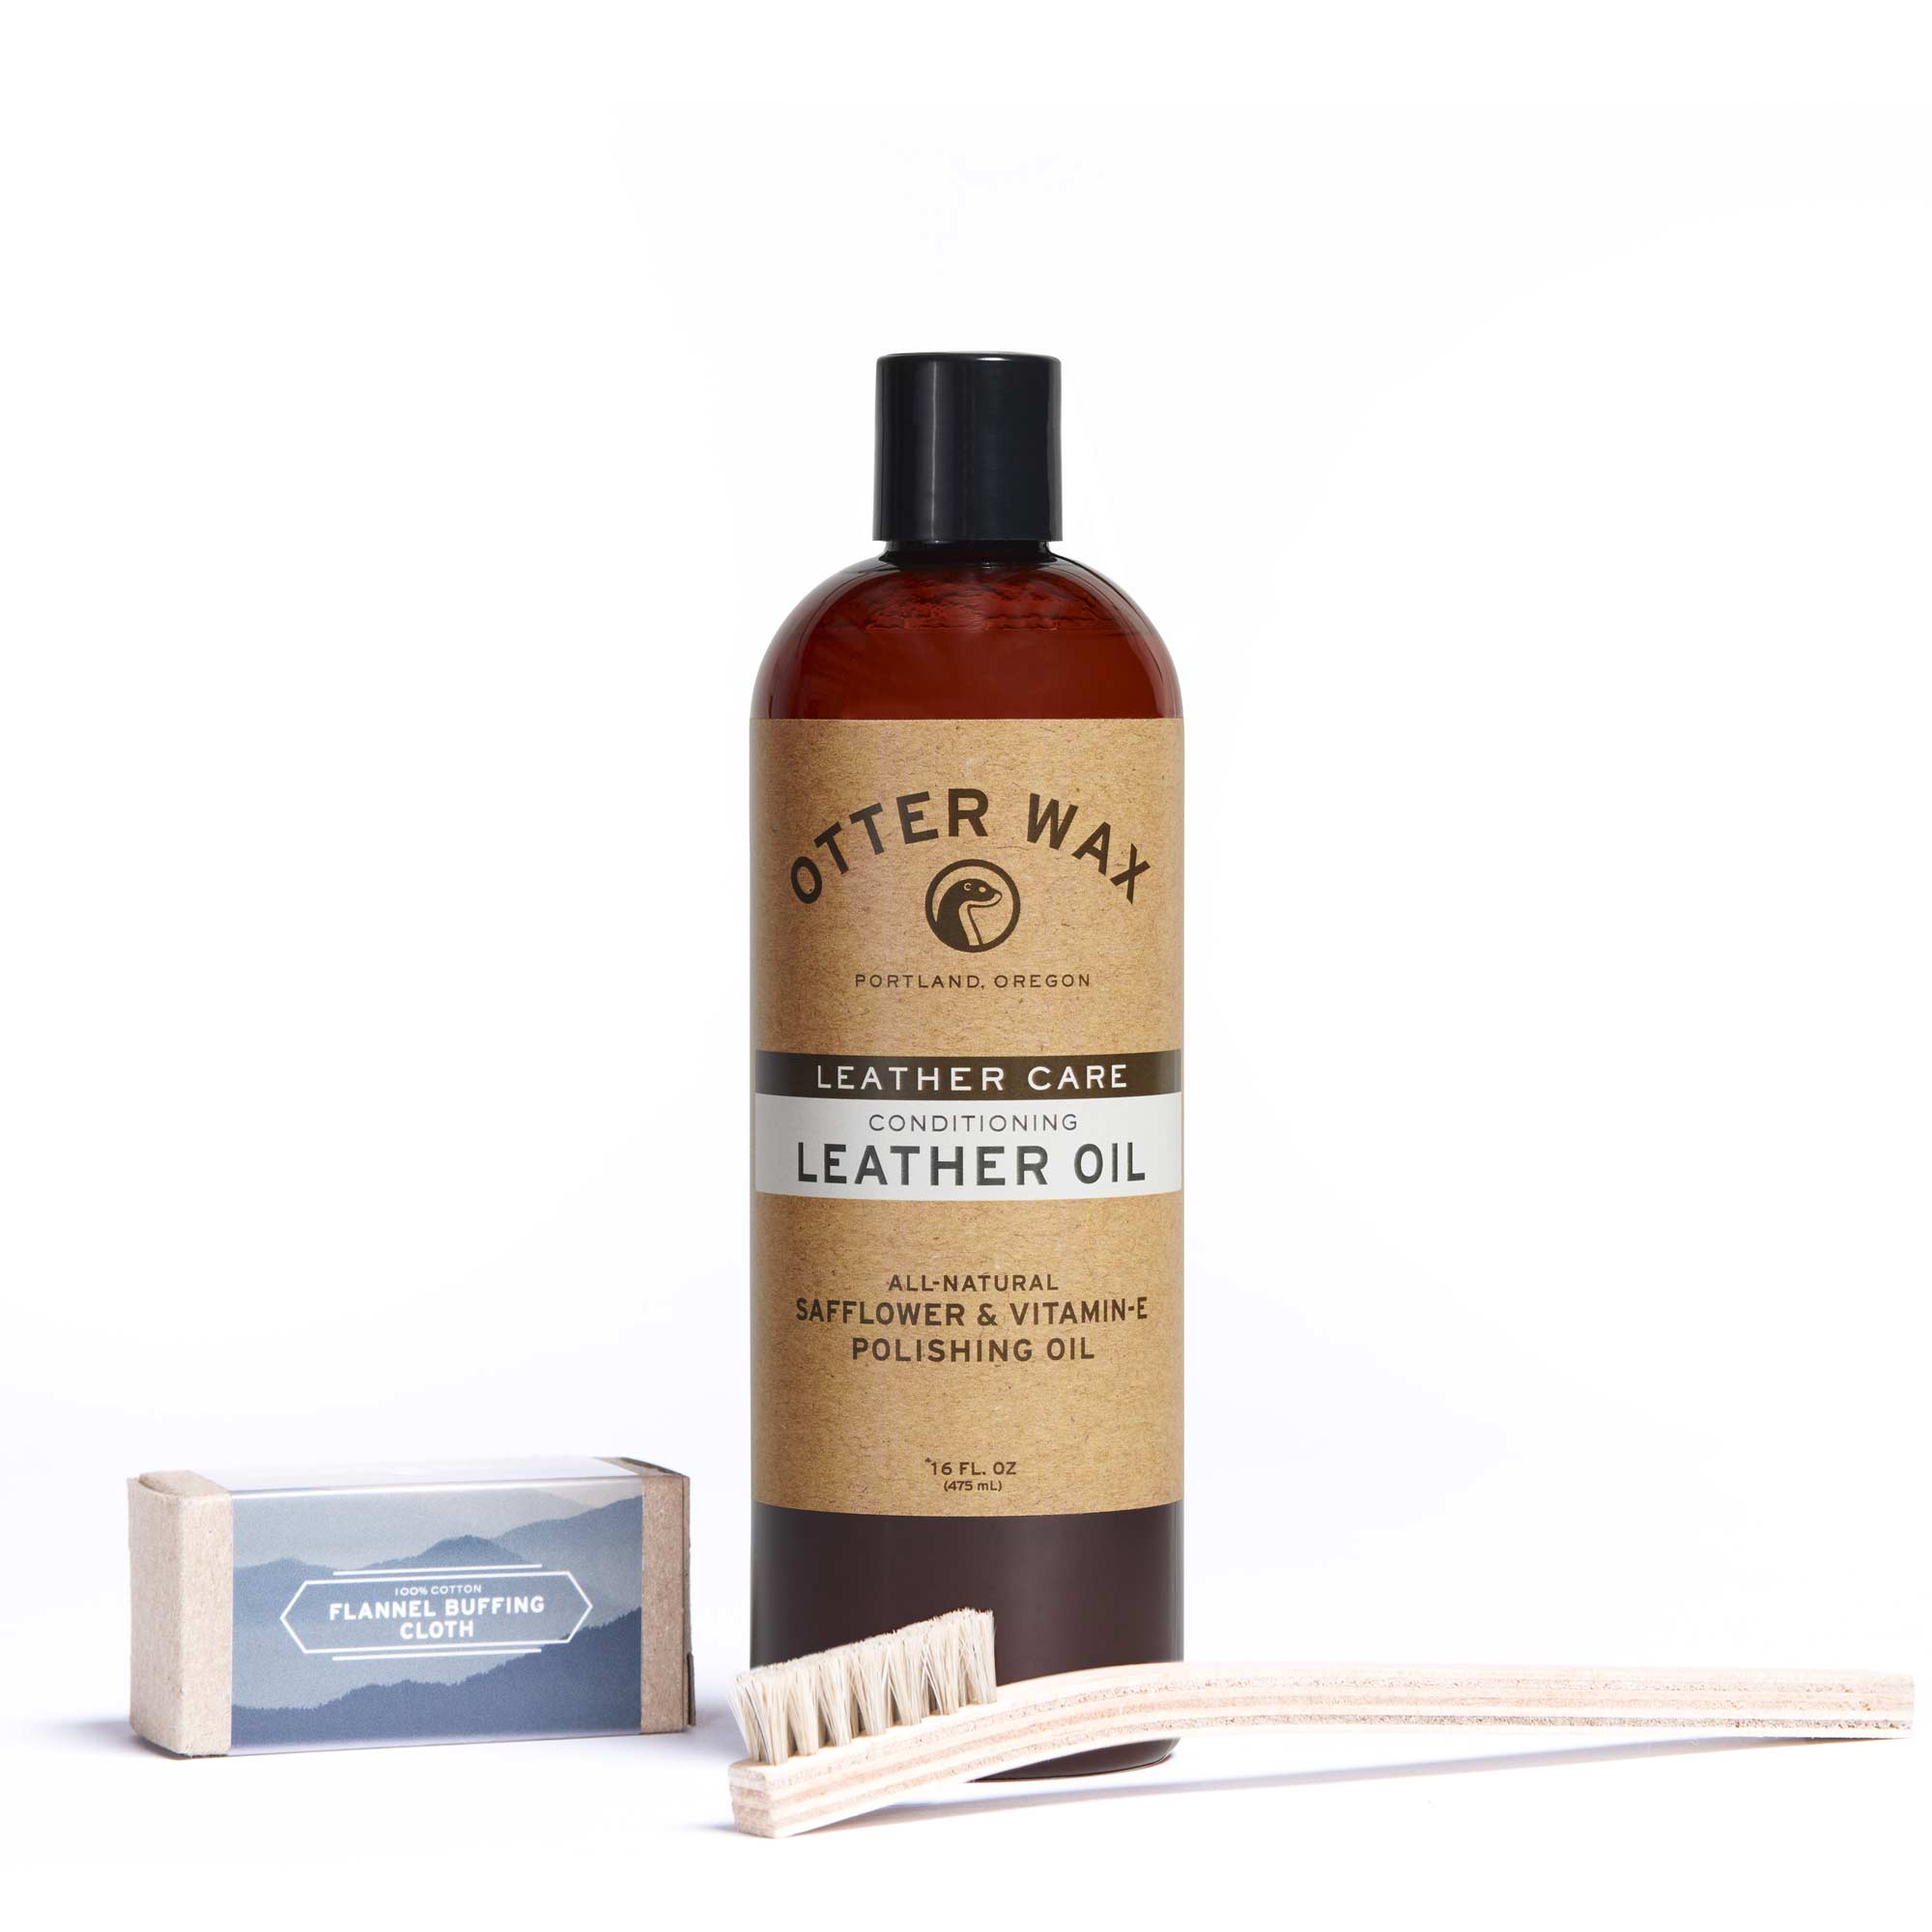 Otter Wax Leather Oil Bundle Including 16oz Conditioner Flannel Buffing Cloth And Horsehair Buffing Brush